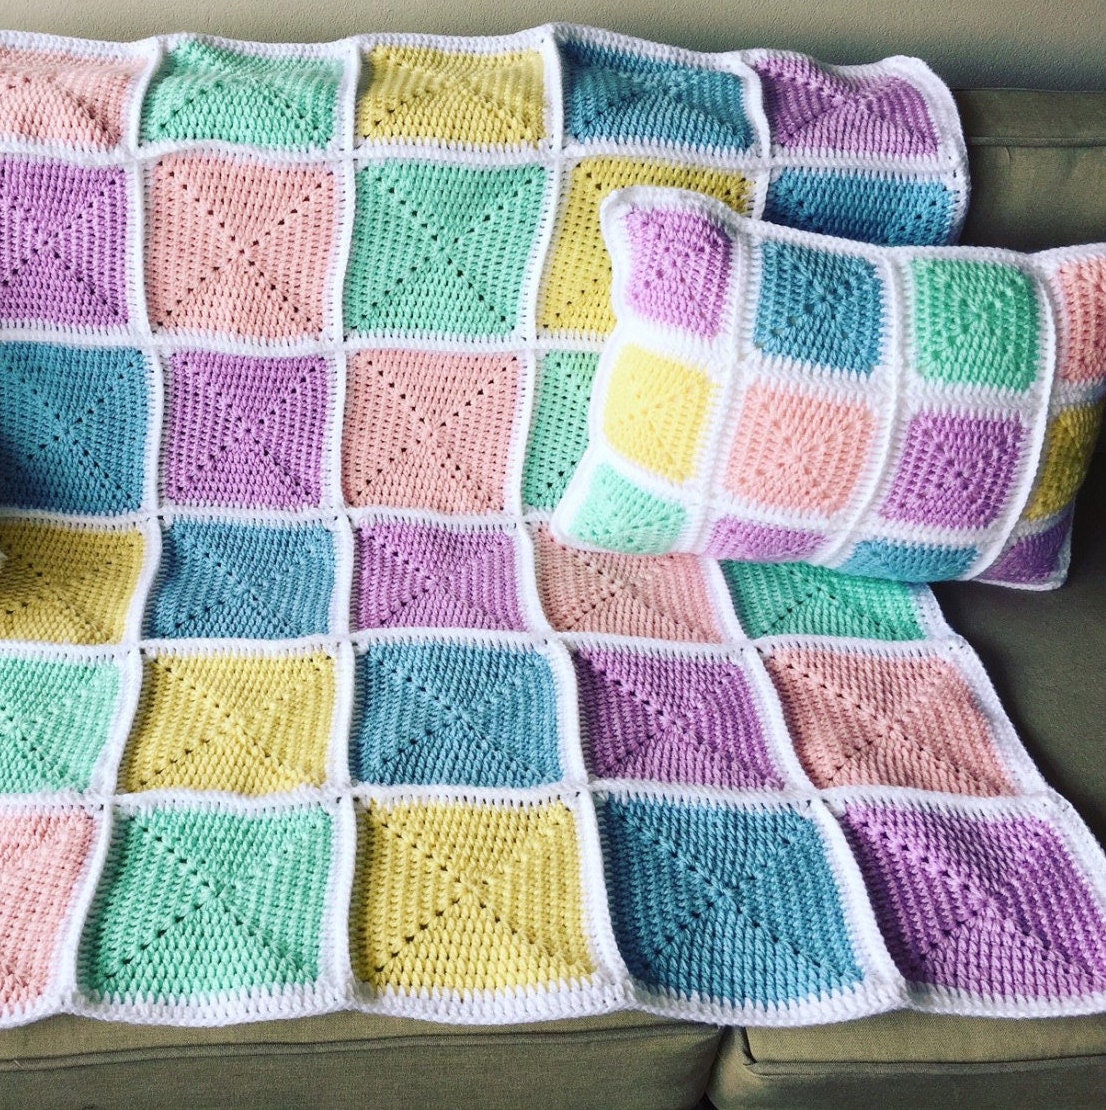 Crochet baby blanket throw & pillow pink blue green lilac | Etsy